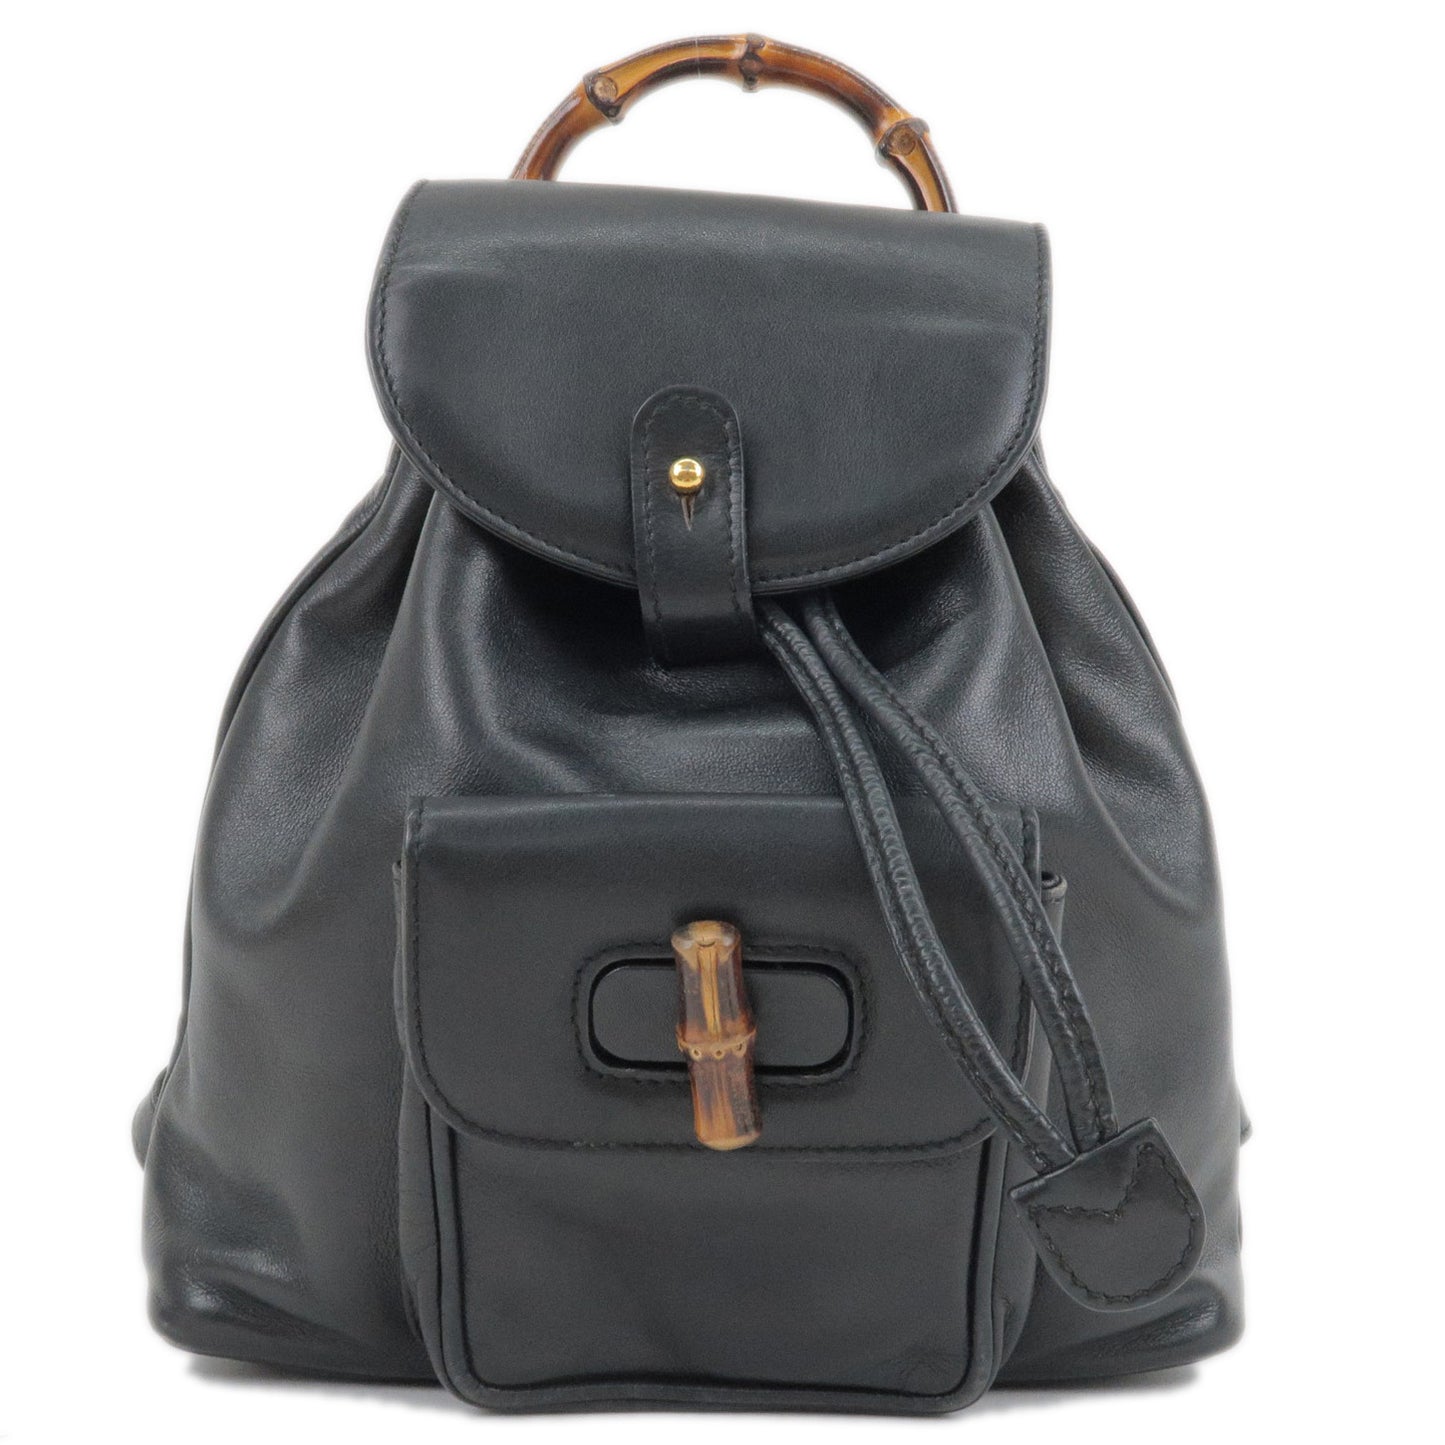 GUCCI-Leather-Bamboo-Back-Pack-Ruck-Sack-Black-003.1705.0030